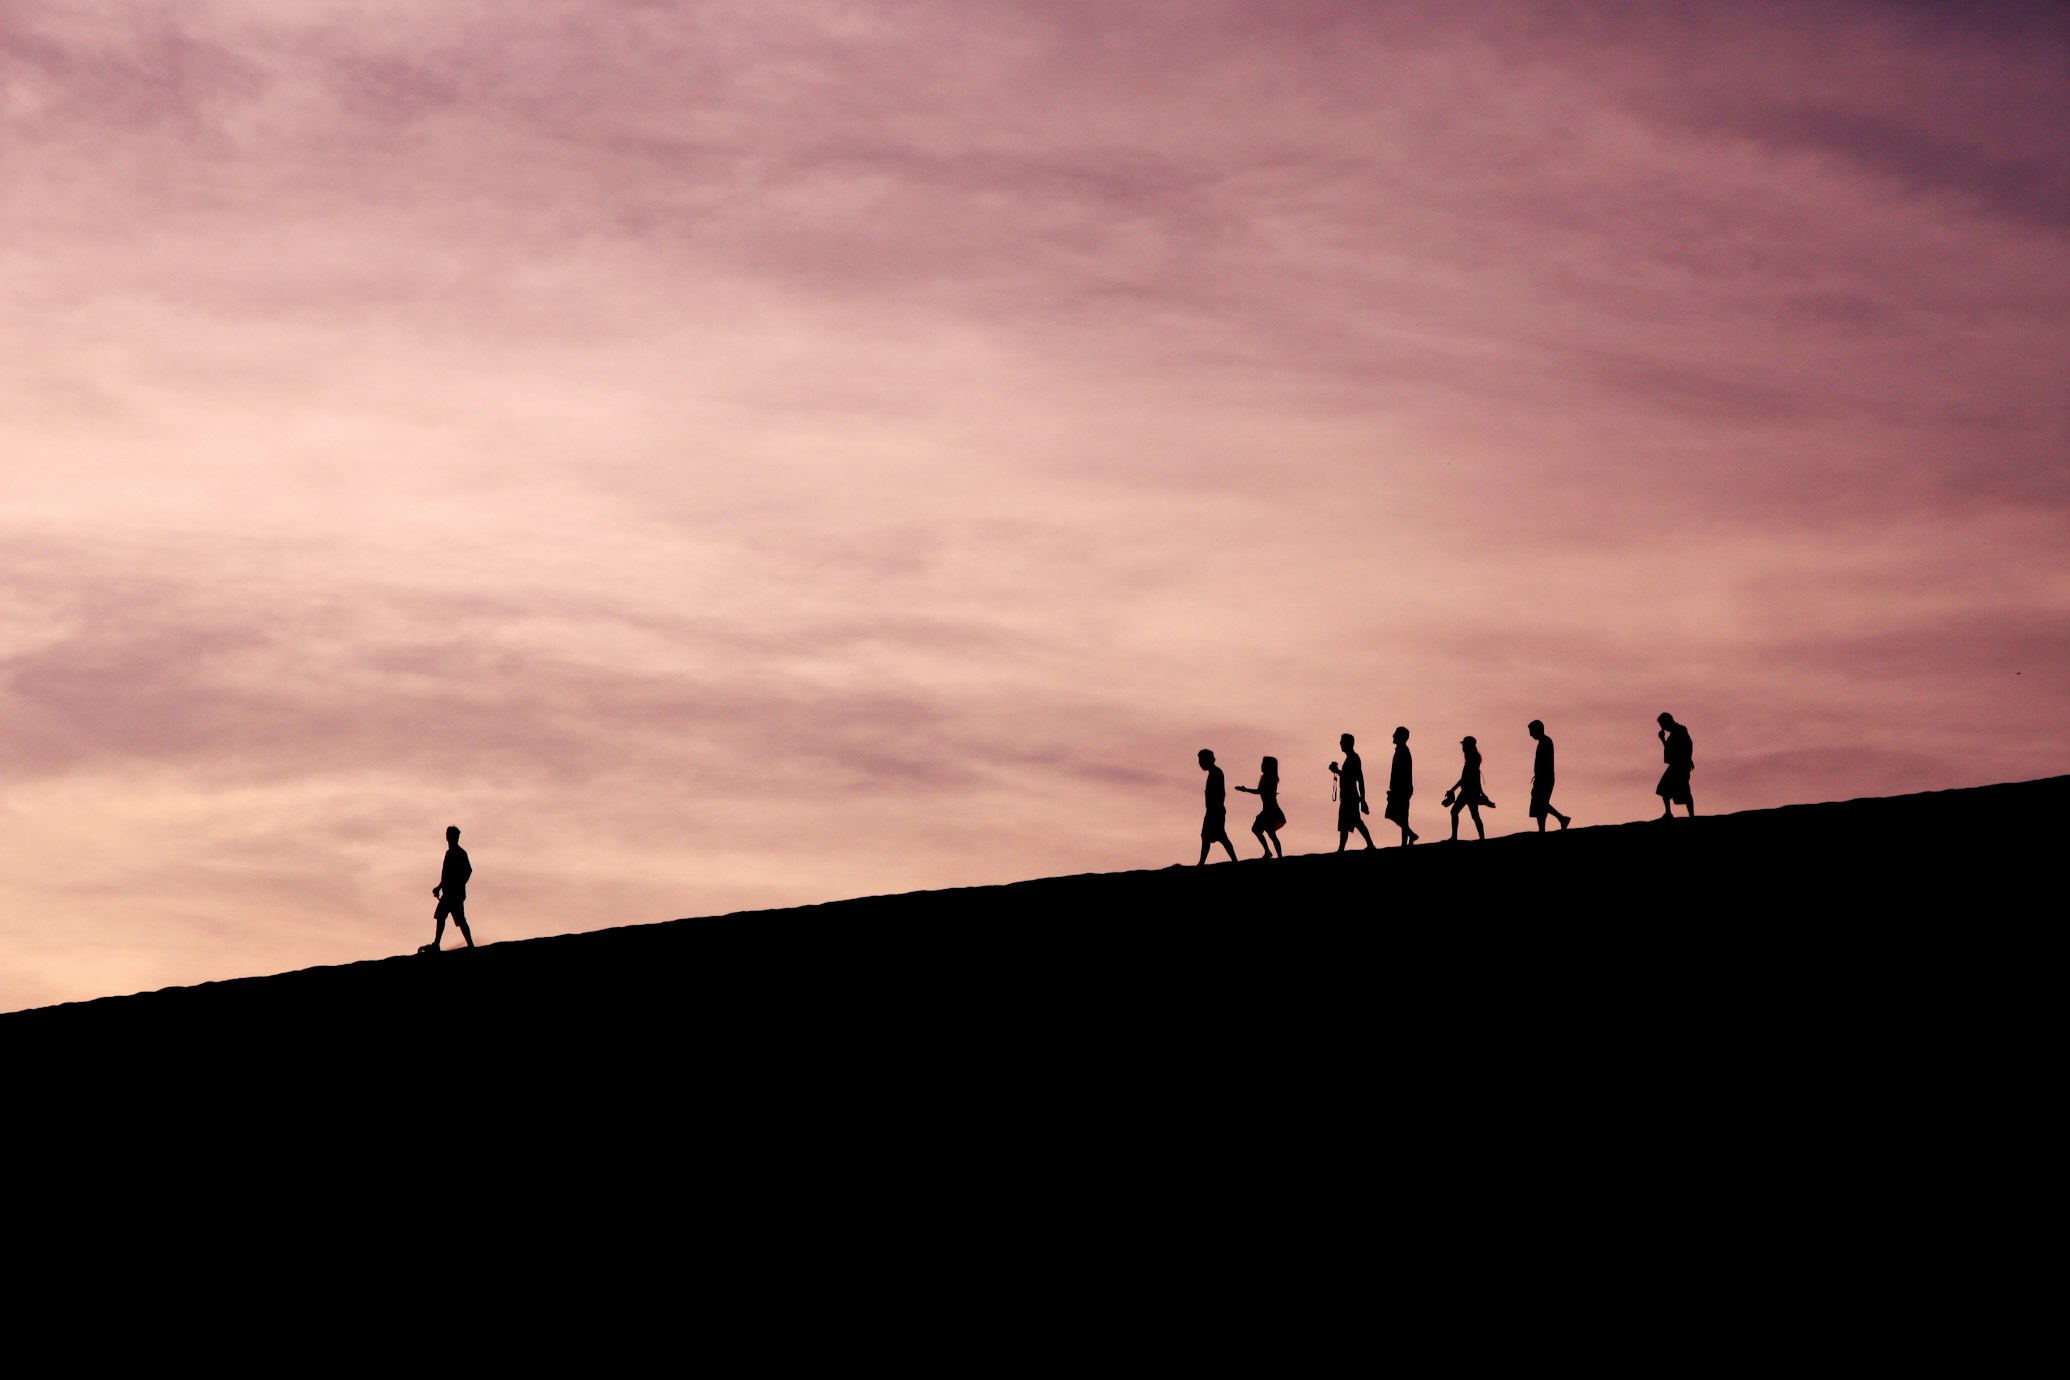 Silhouettes of people walking on a hill. One person is further ahead, leading.